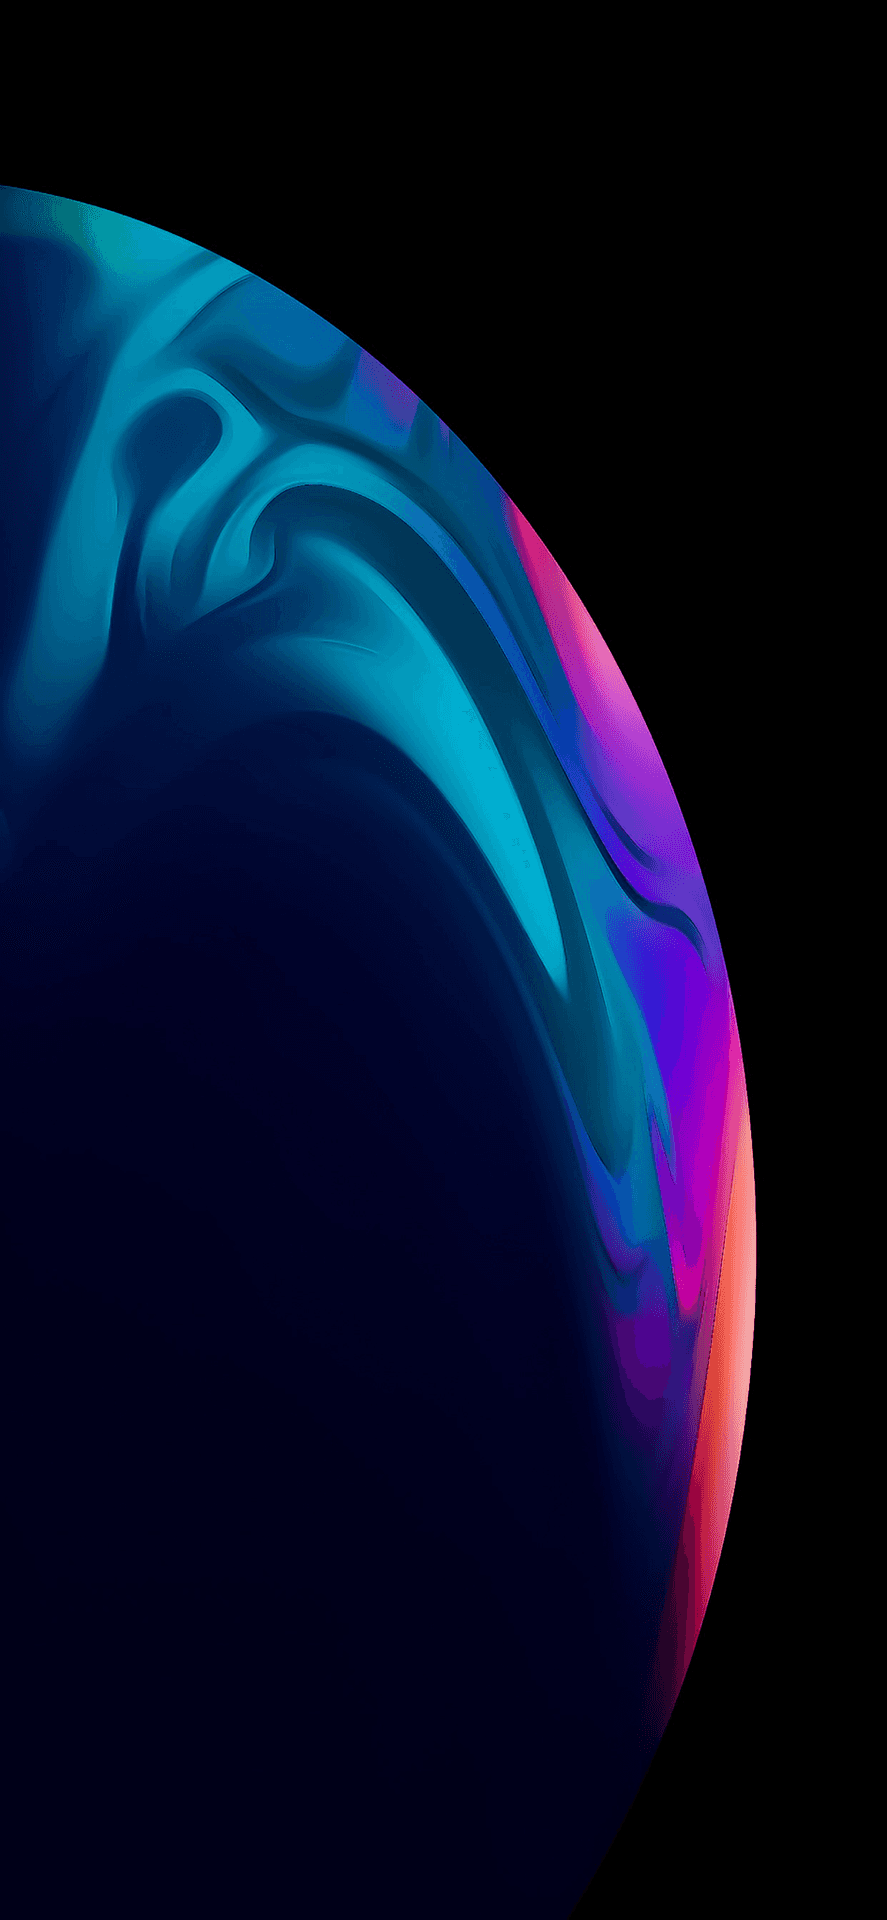 "a Sophisticated Iphone Xr Displaying Elegant And Vibrant Abstract Design On Its Screen."